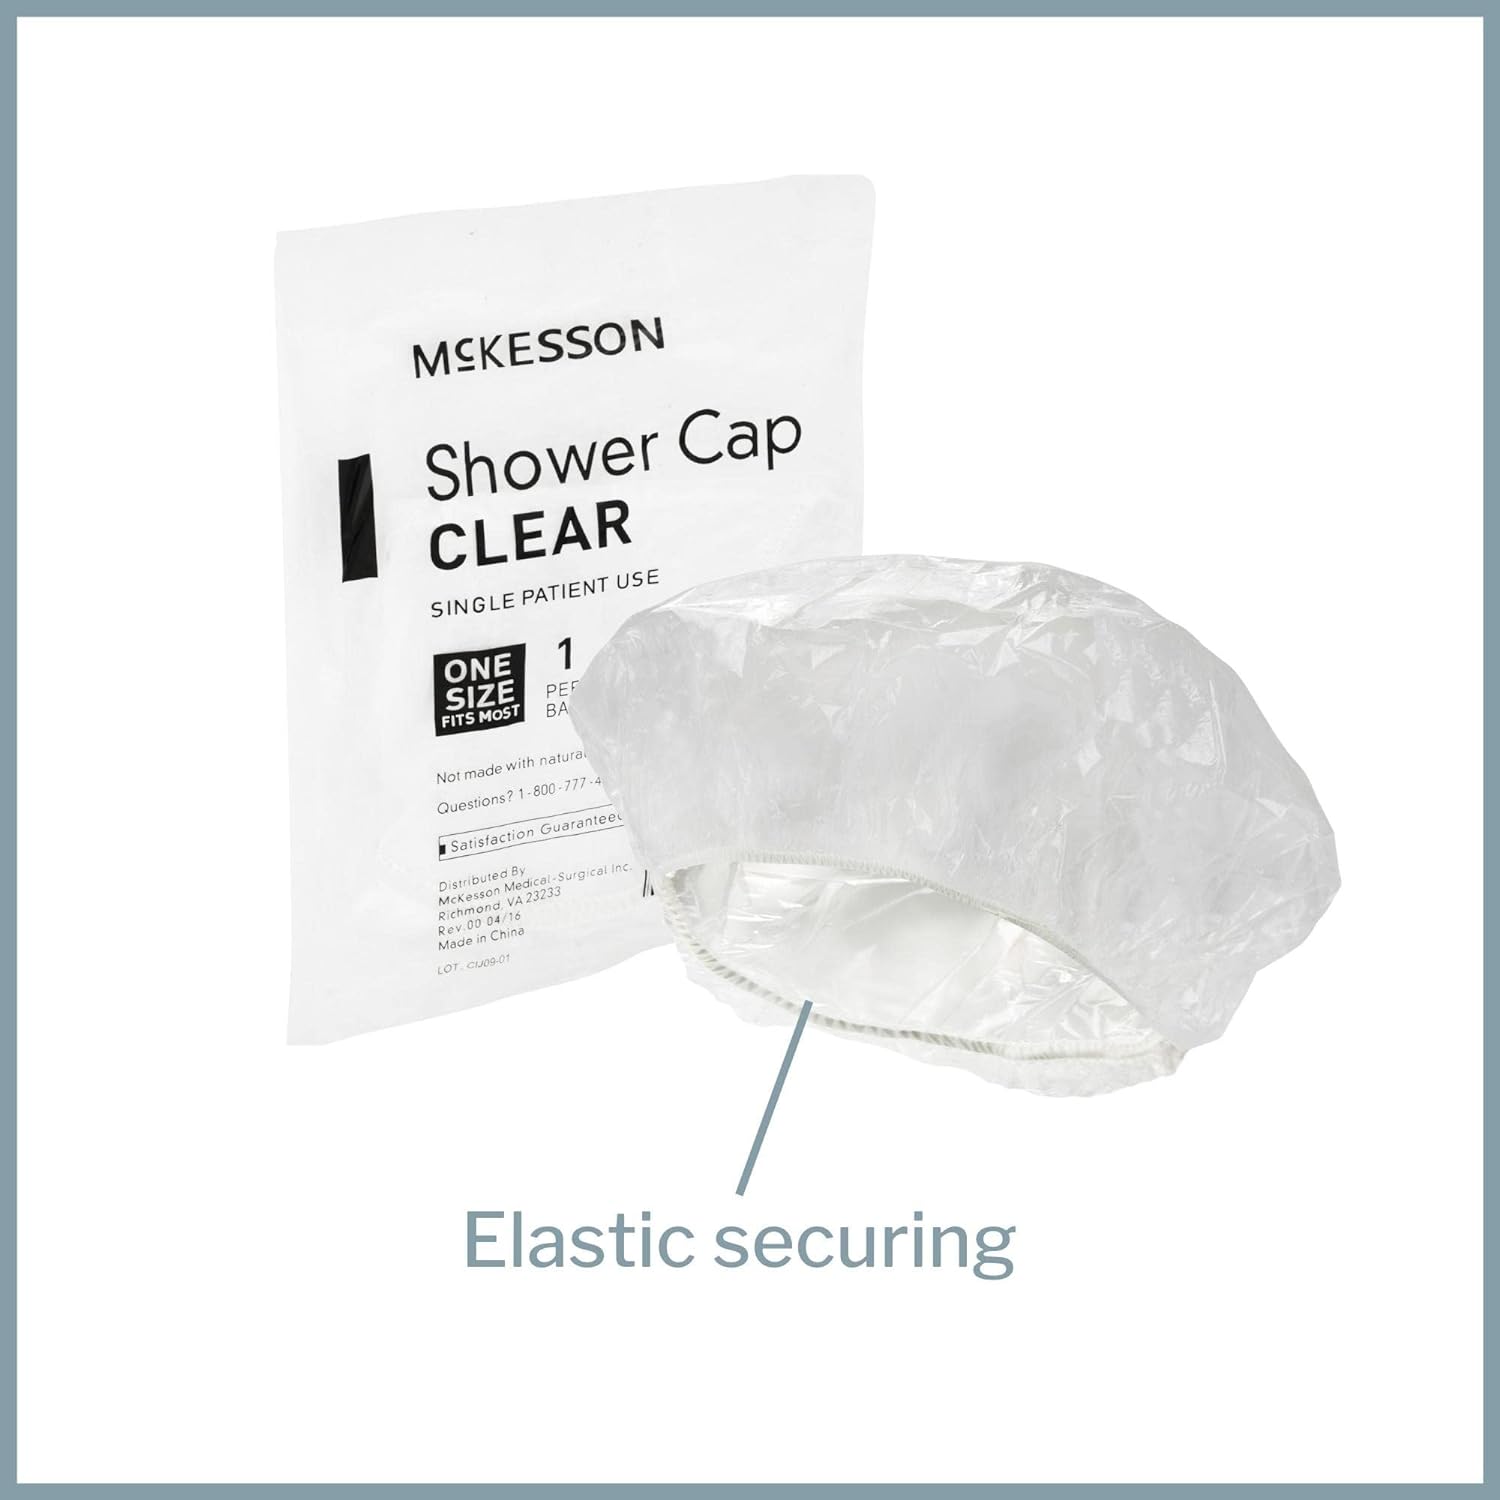 McKesson Shower Cap, Single Patient Use, Clear, One Size Fits Most, 200 Count